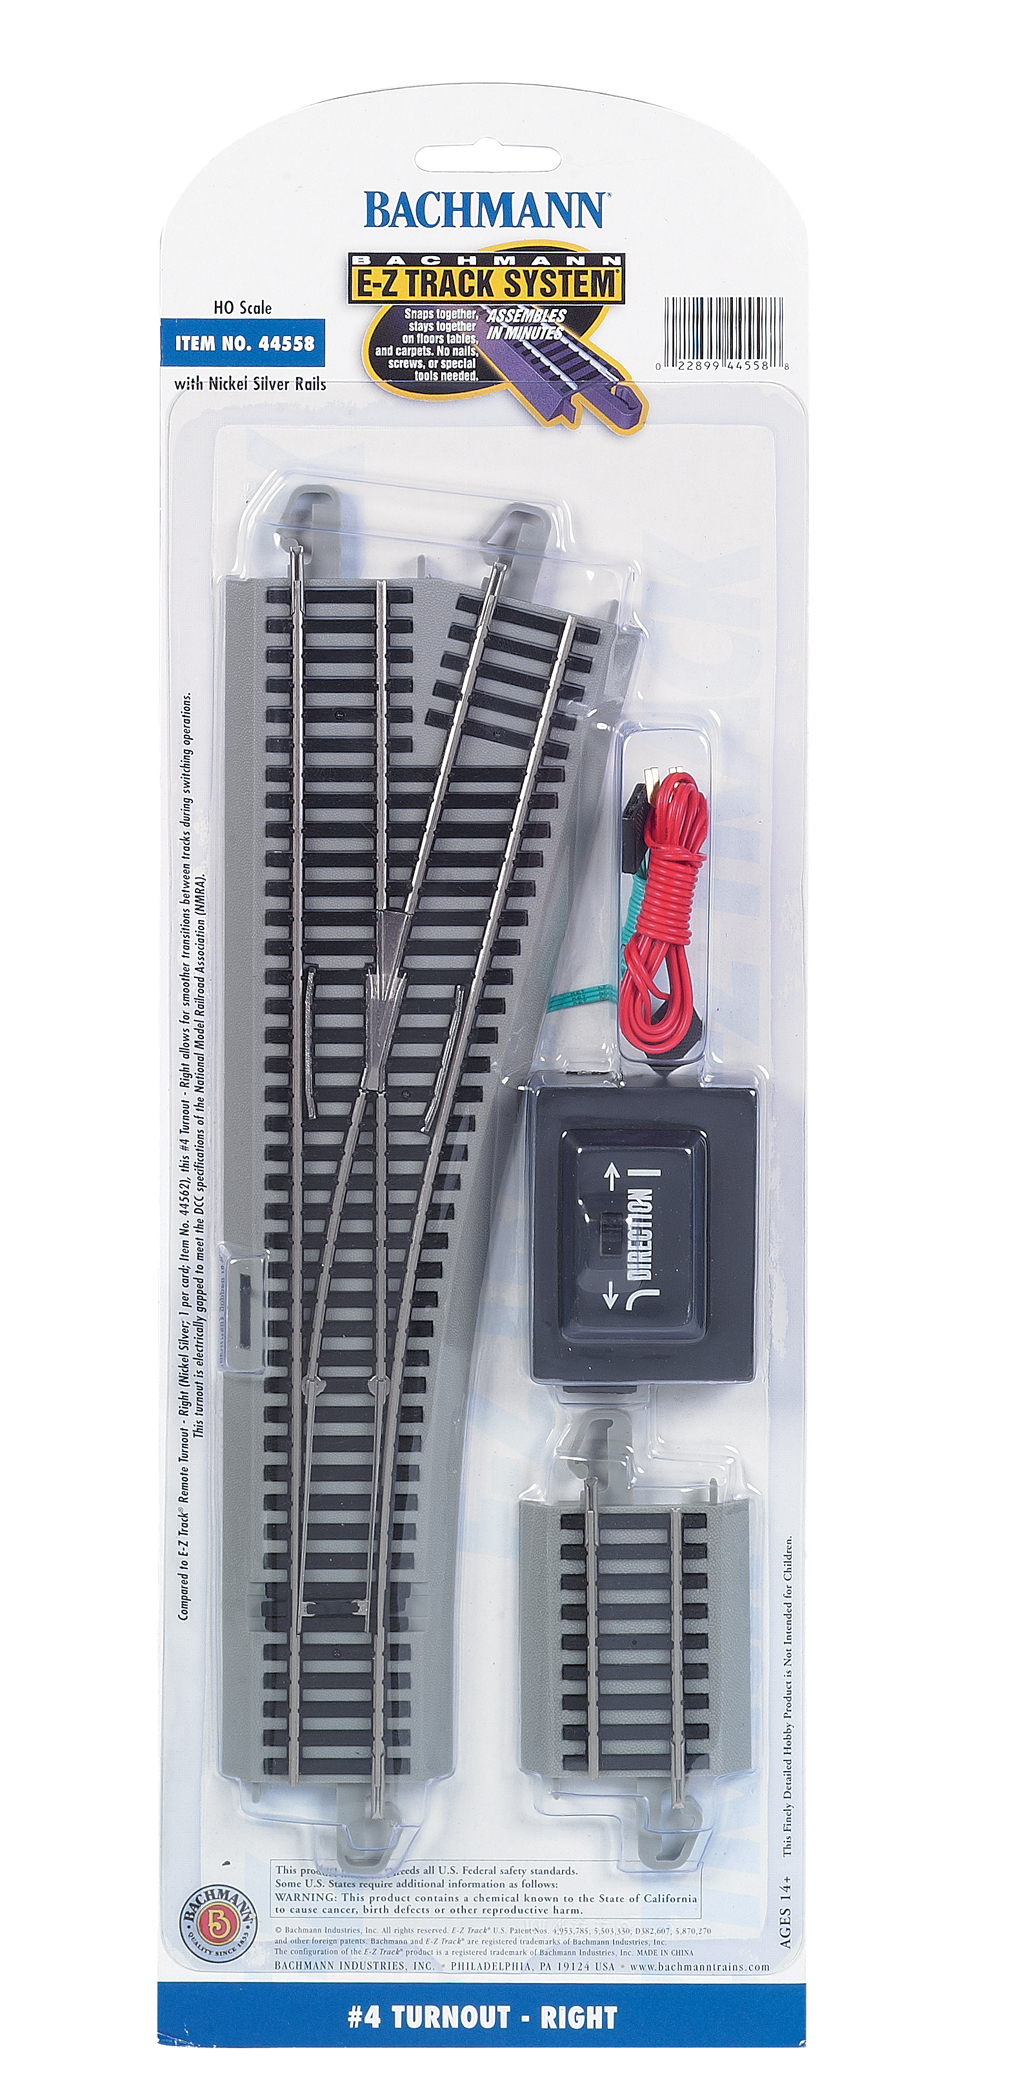 Bachmann 44560 HO Scale #6 Turnout Right for sale online 